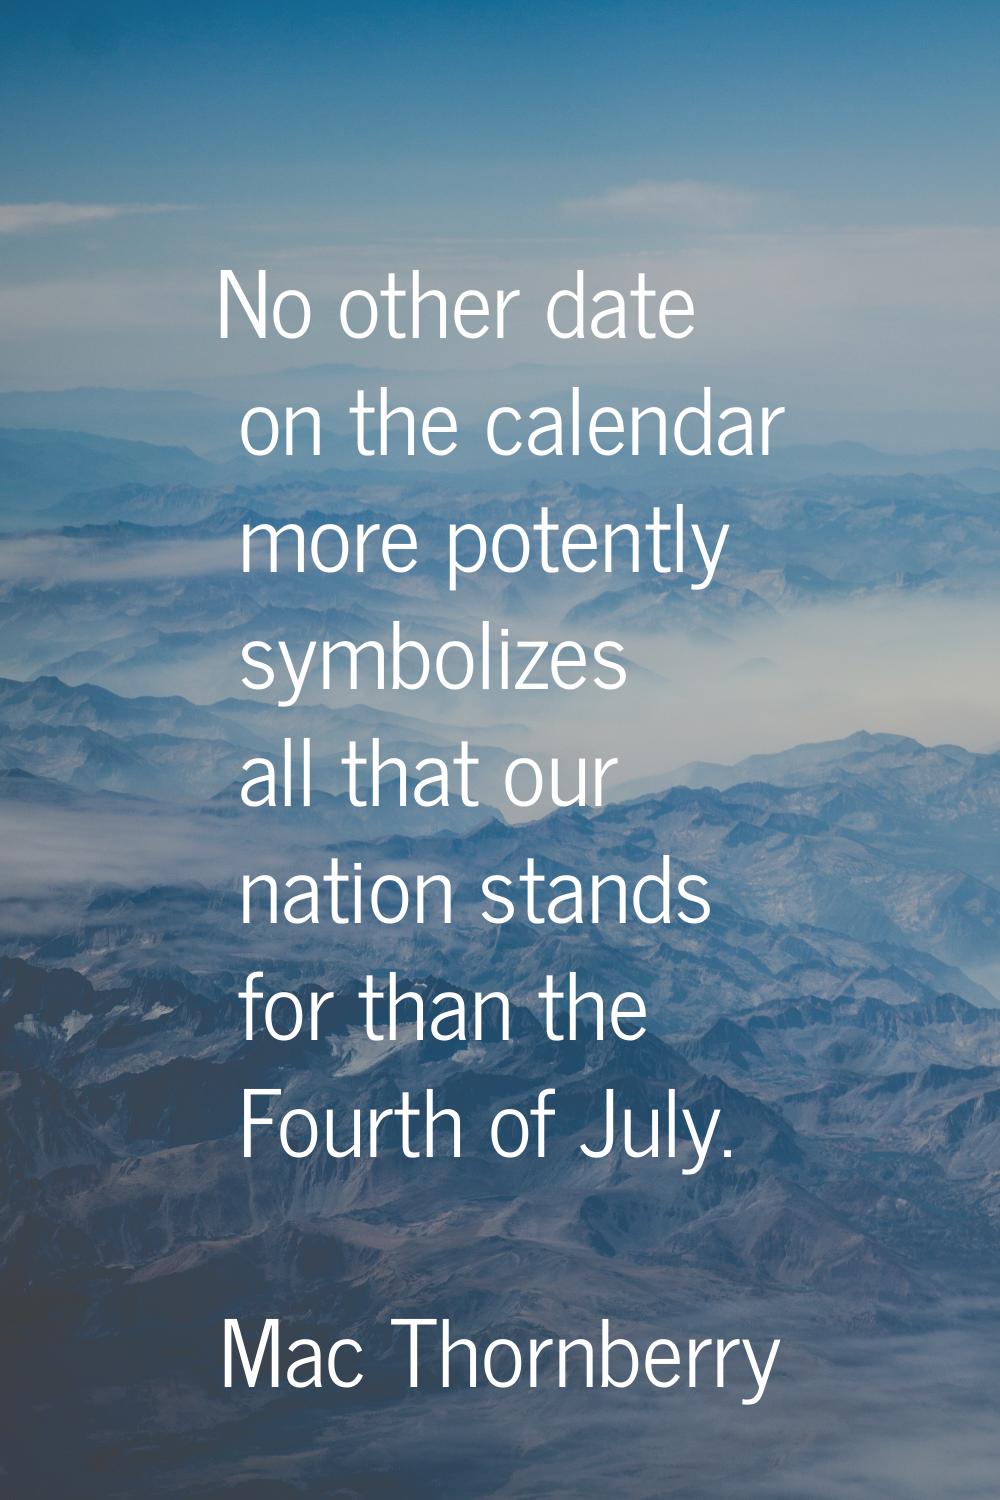 No other date on the calendar more potently symbolizes all that our nation stands for than the Four